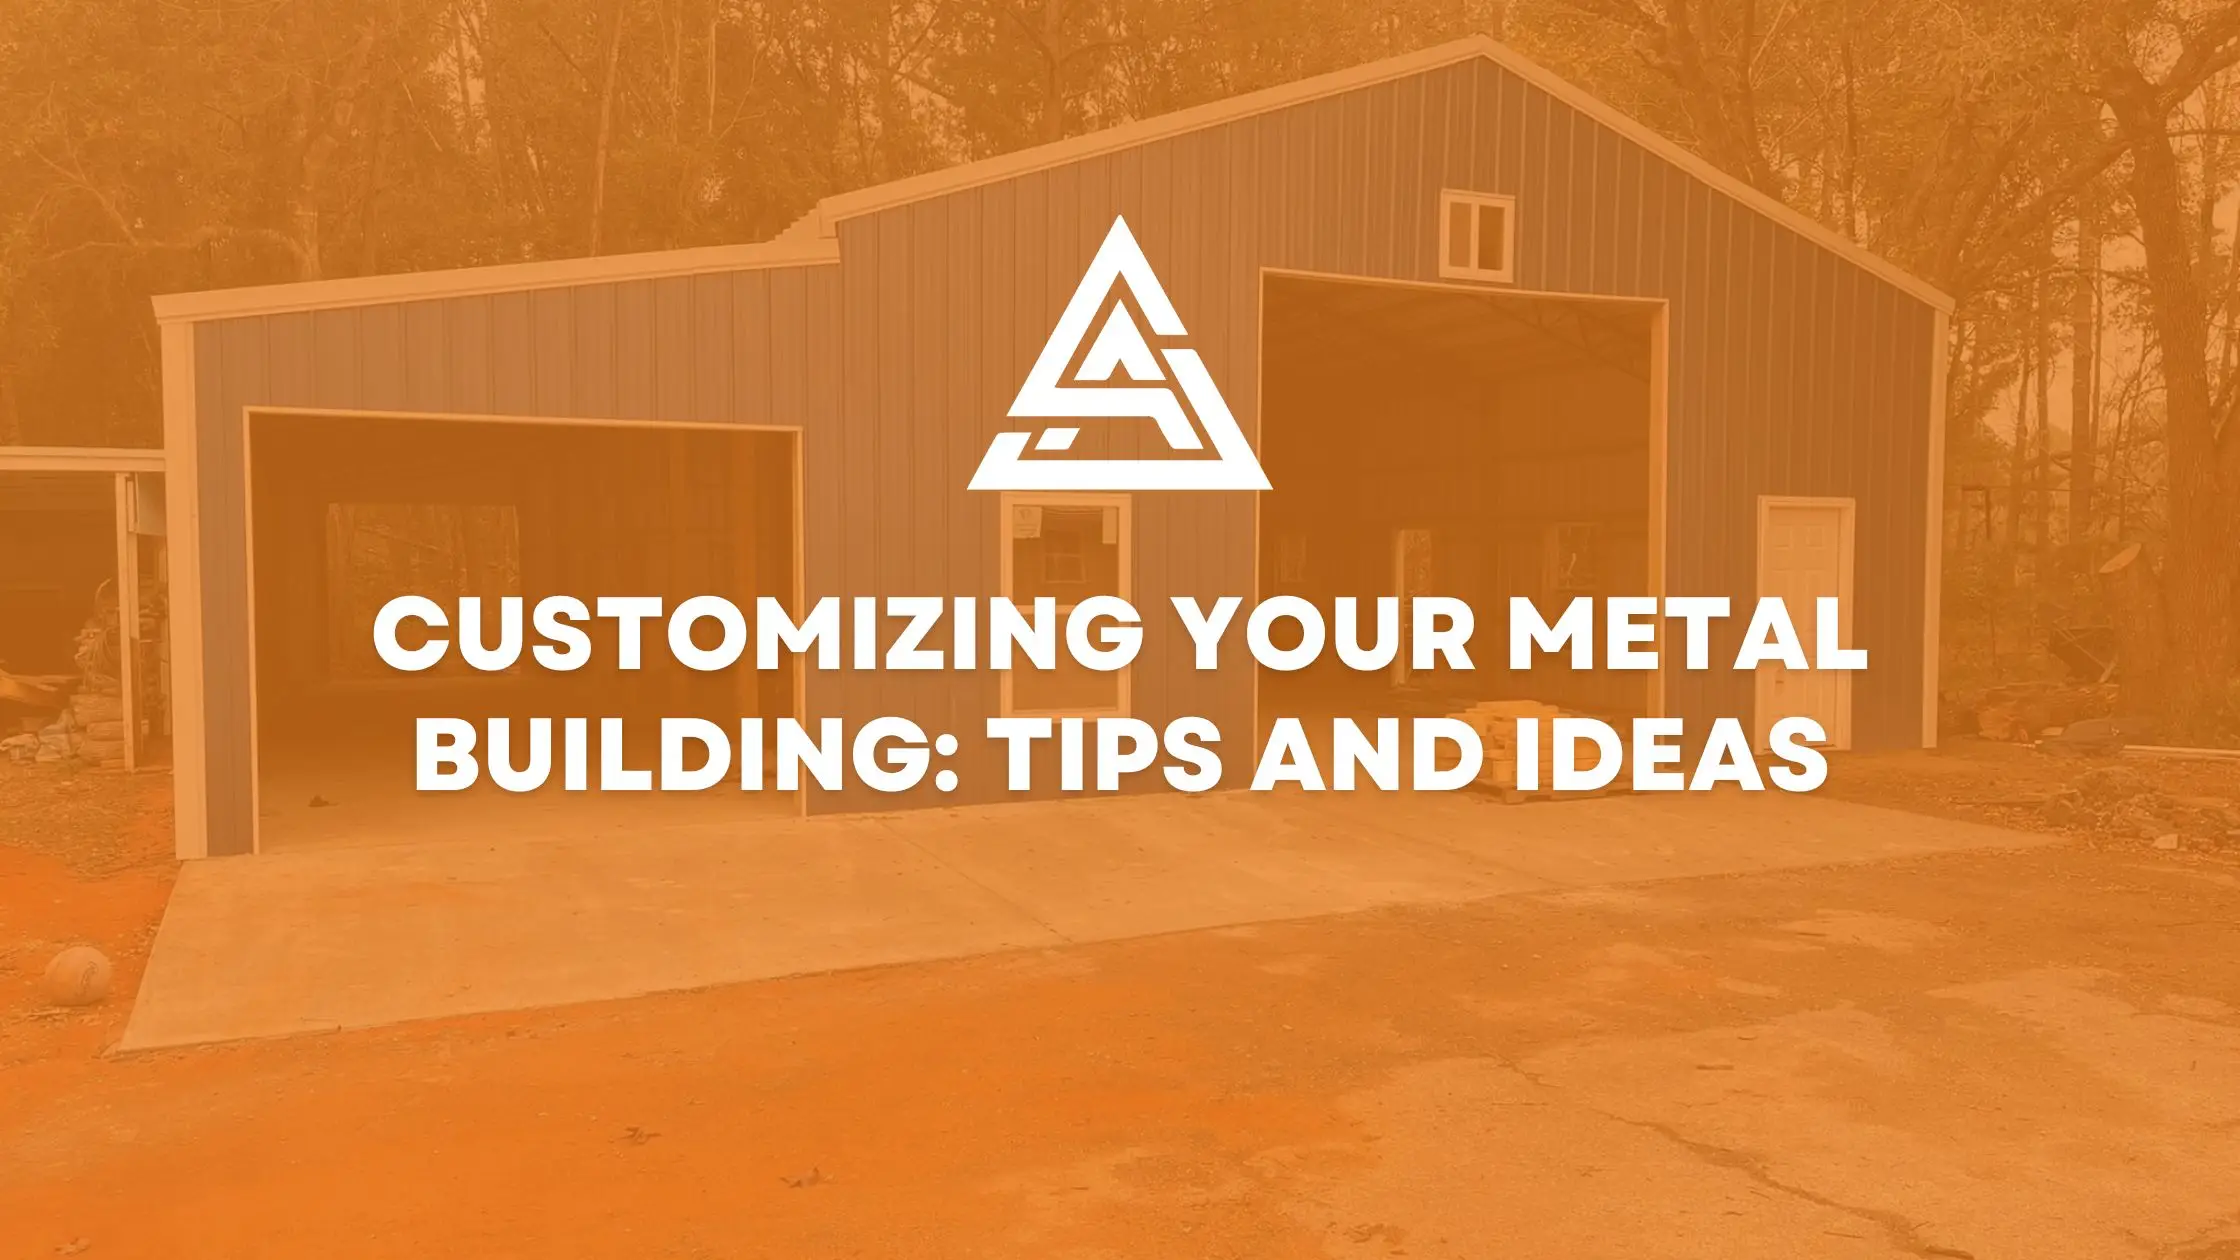 Customizing Your Metal Building: Tips and Ideas